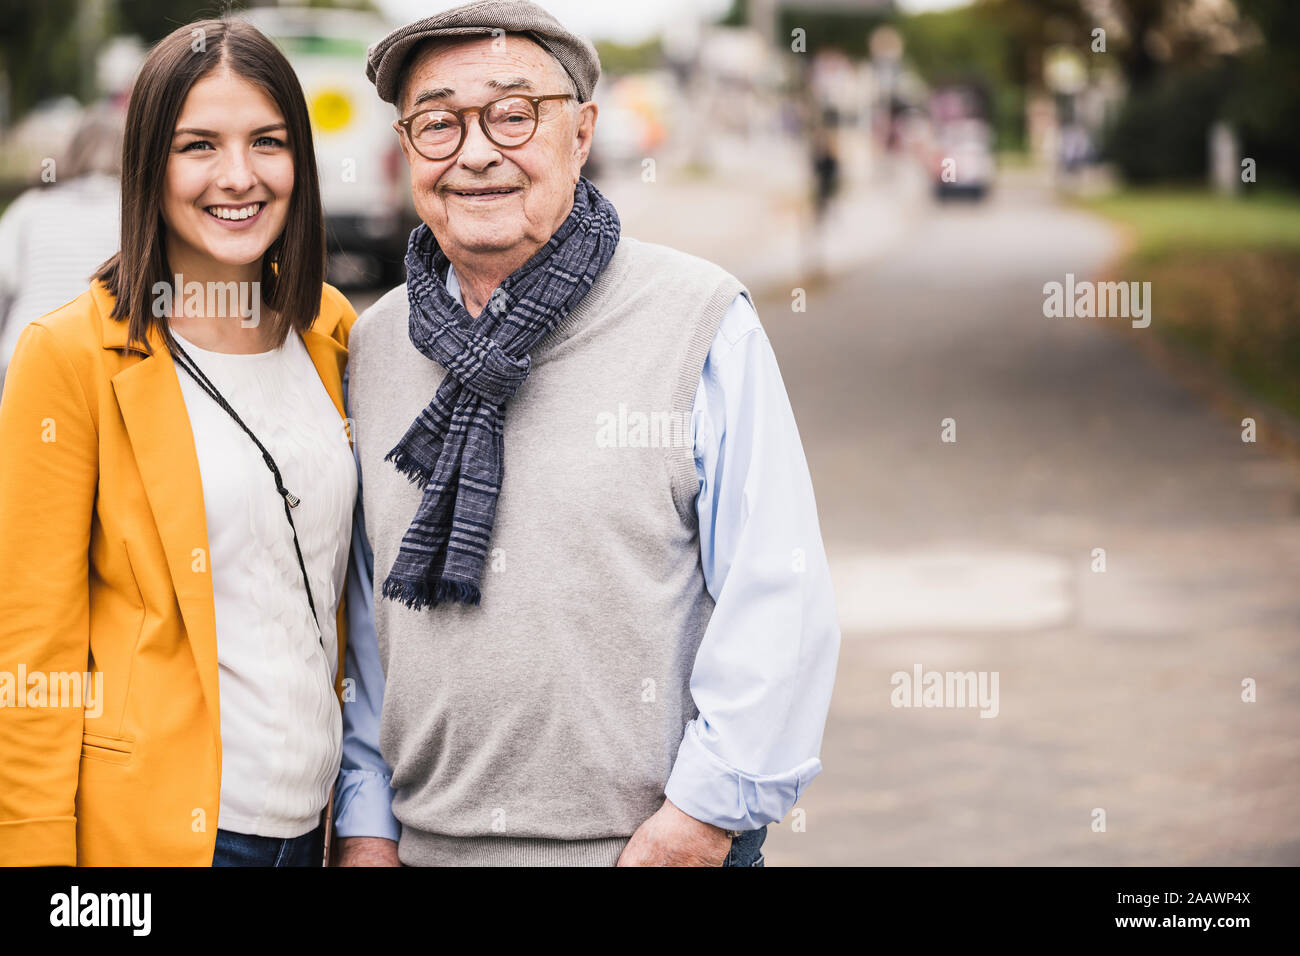 Portrait of senior man side by side with his adult granddaughter Stock Photo